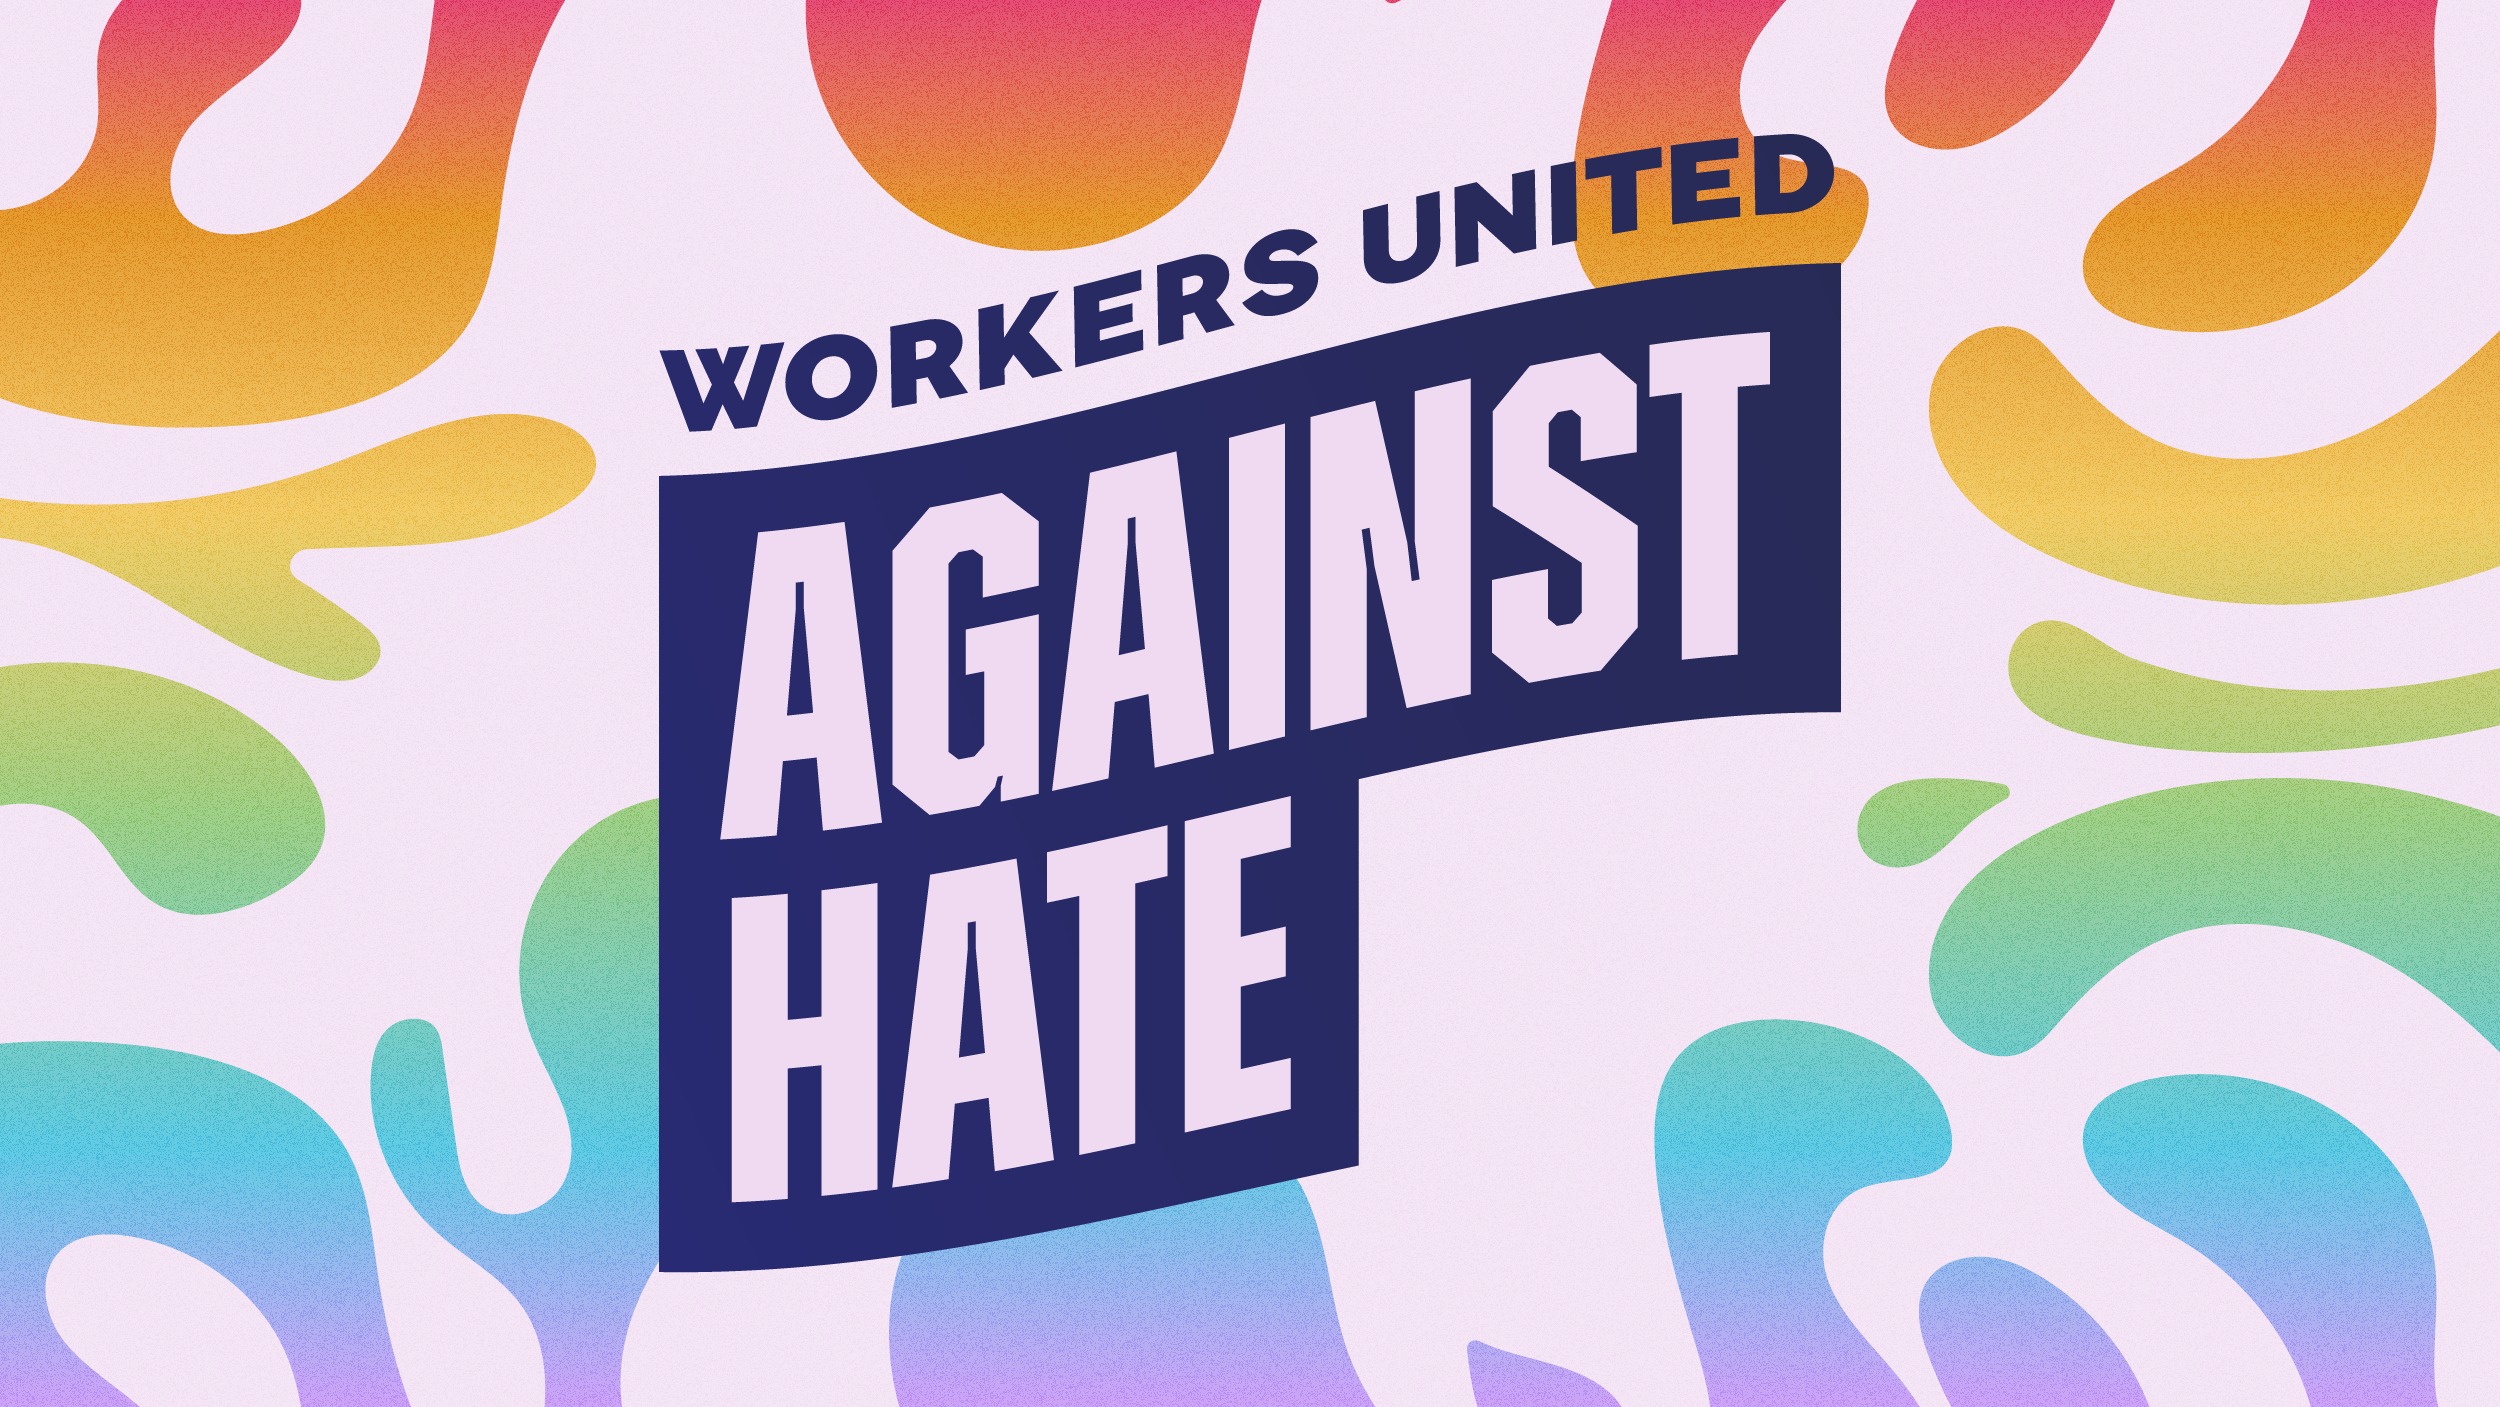 A colourful graphic says " Workers united against hate"